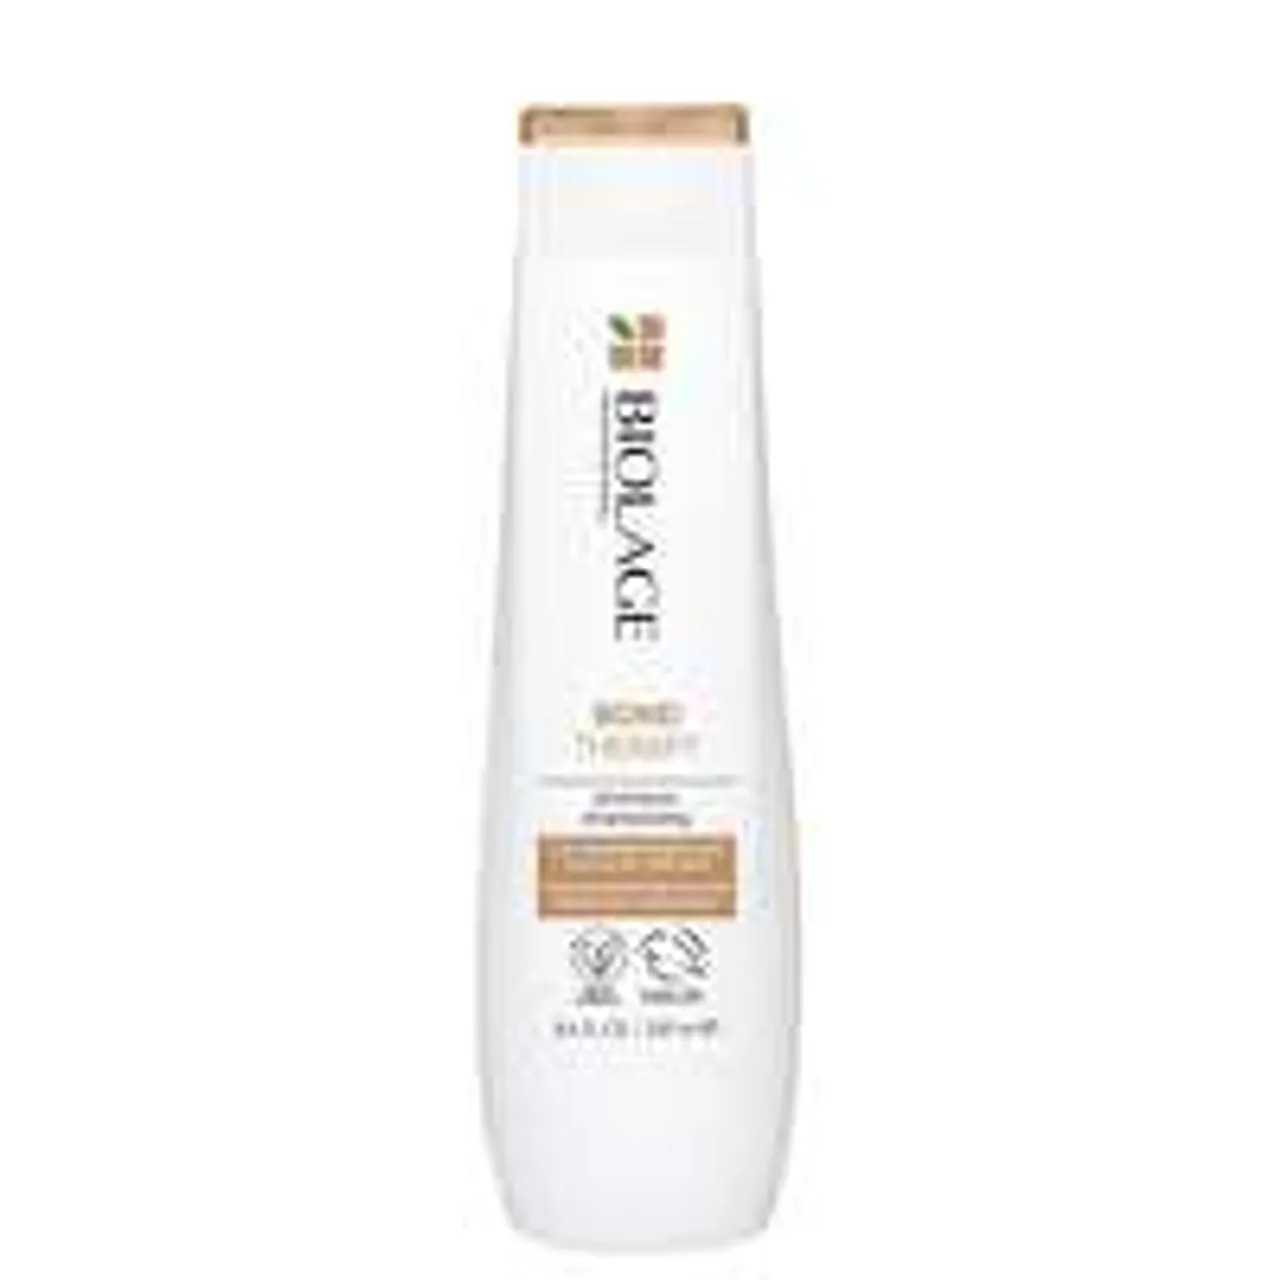 Biolage Bond Therapy Cleansing Shampoo Infused with Citric Acid and Coconut Oil for Over-Processed Damaged Hair 250ml